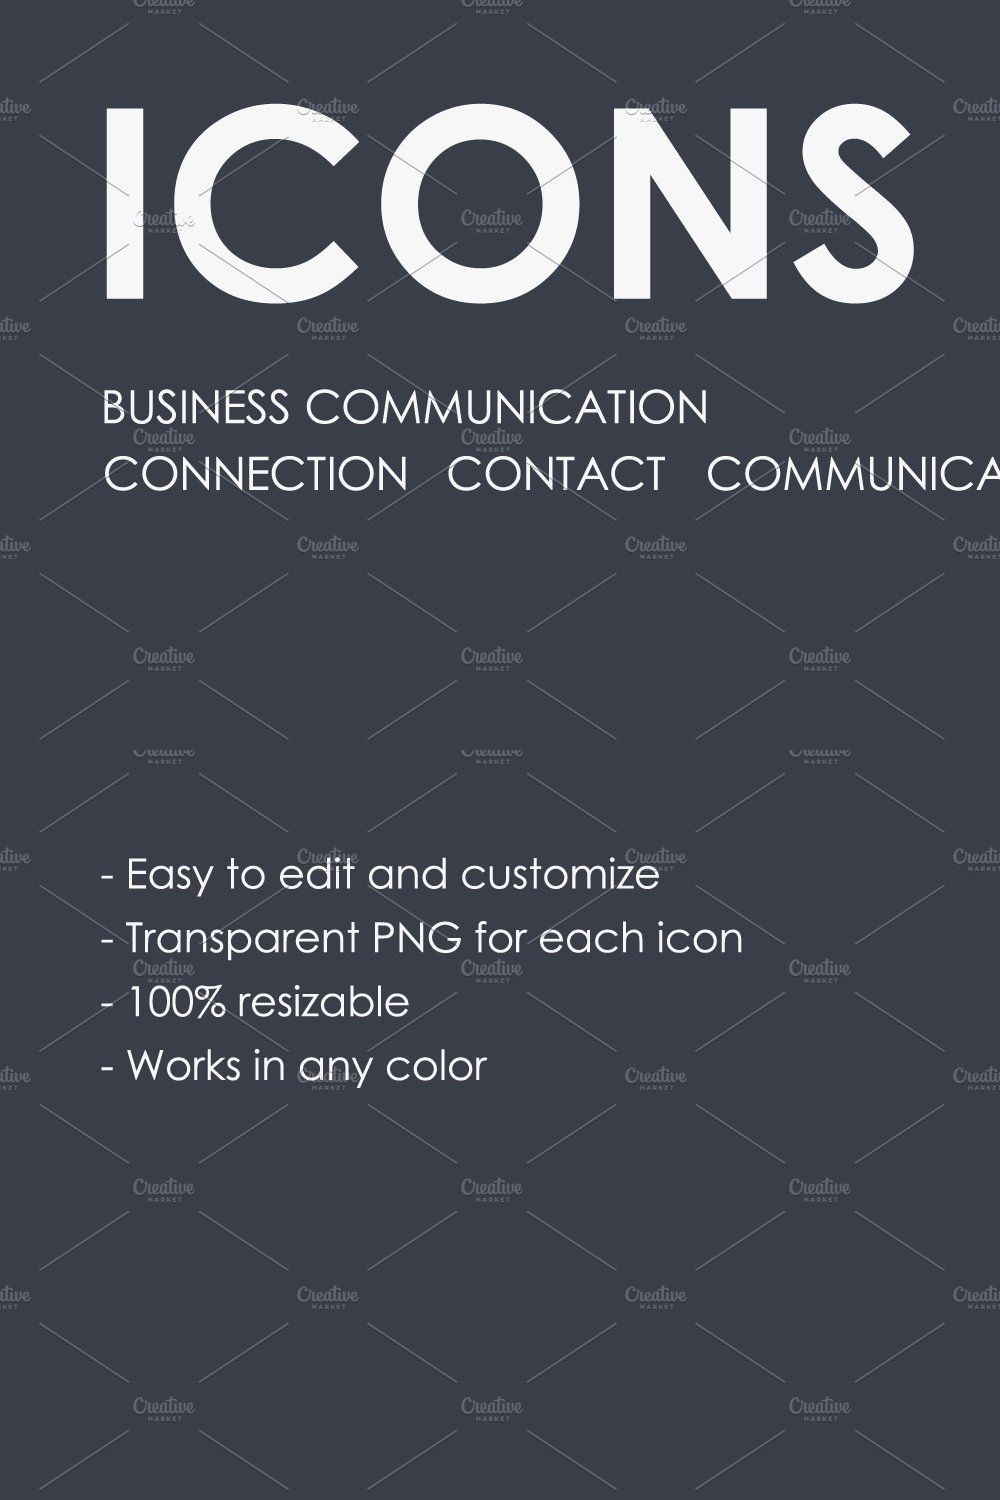 Business communication icons pinterest preview image.